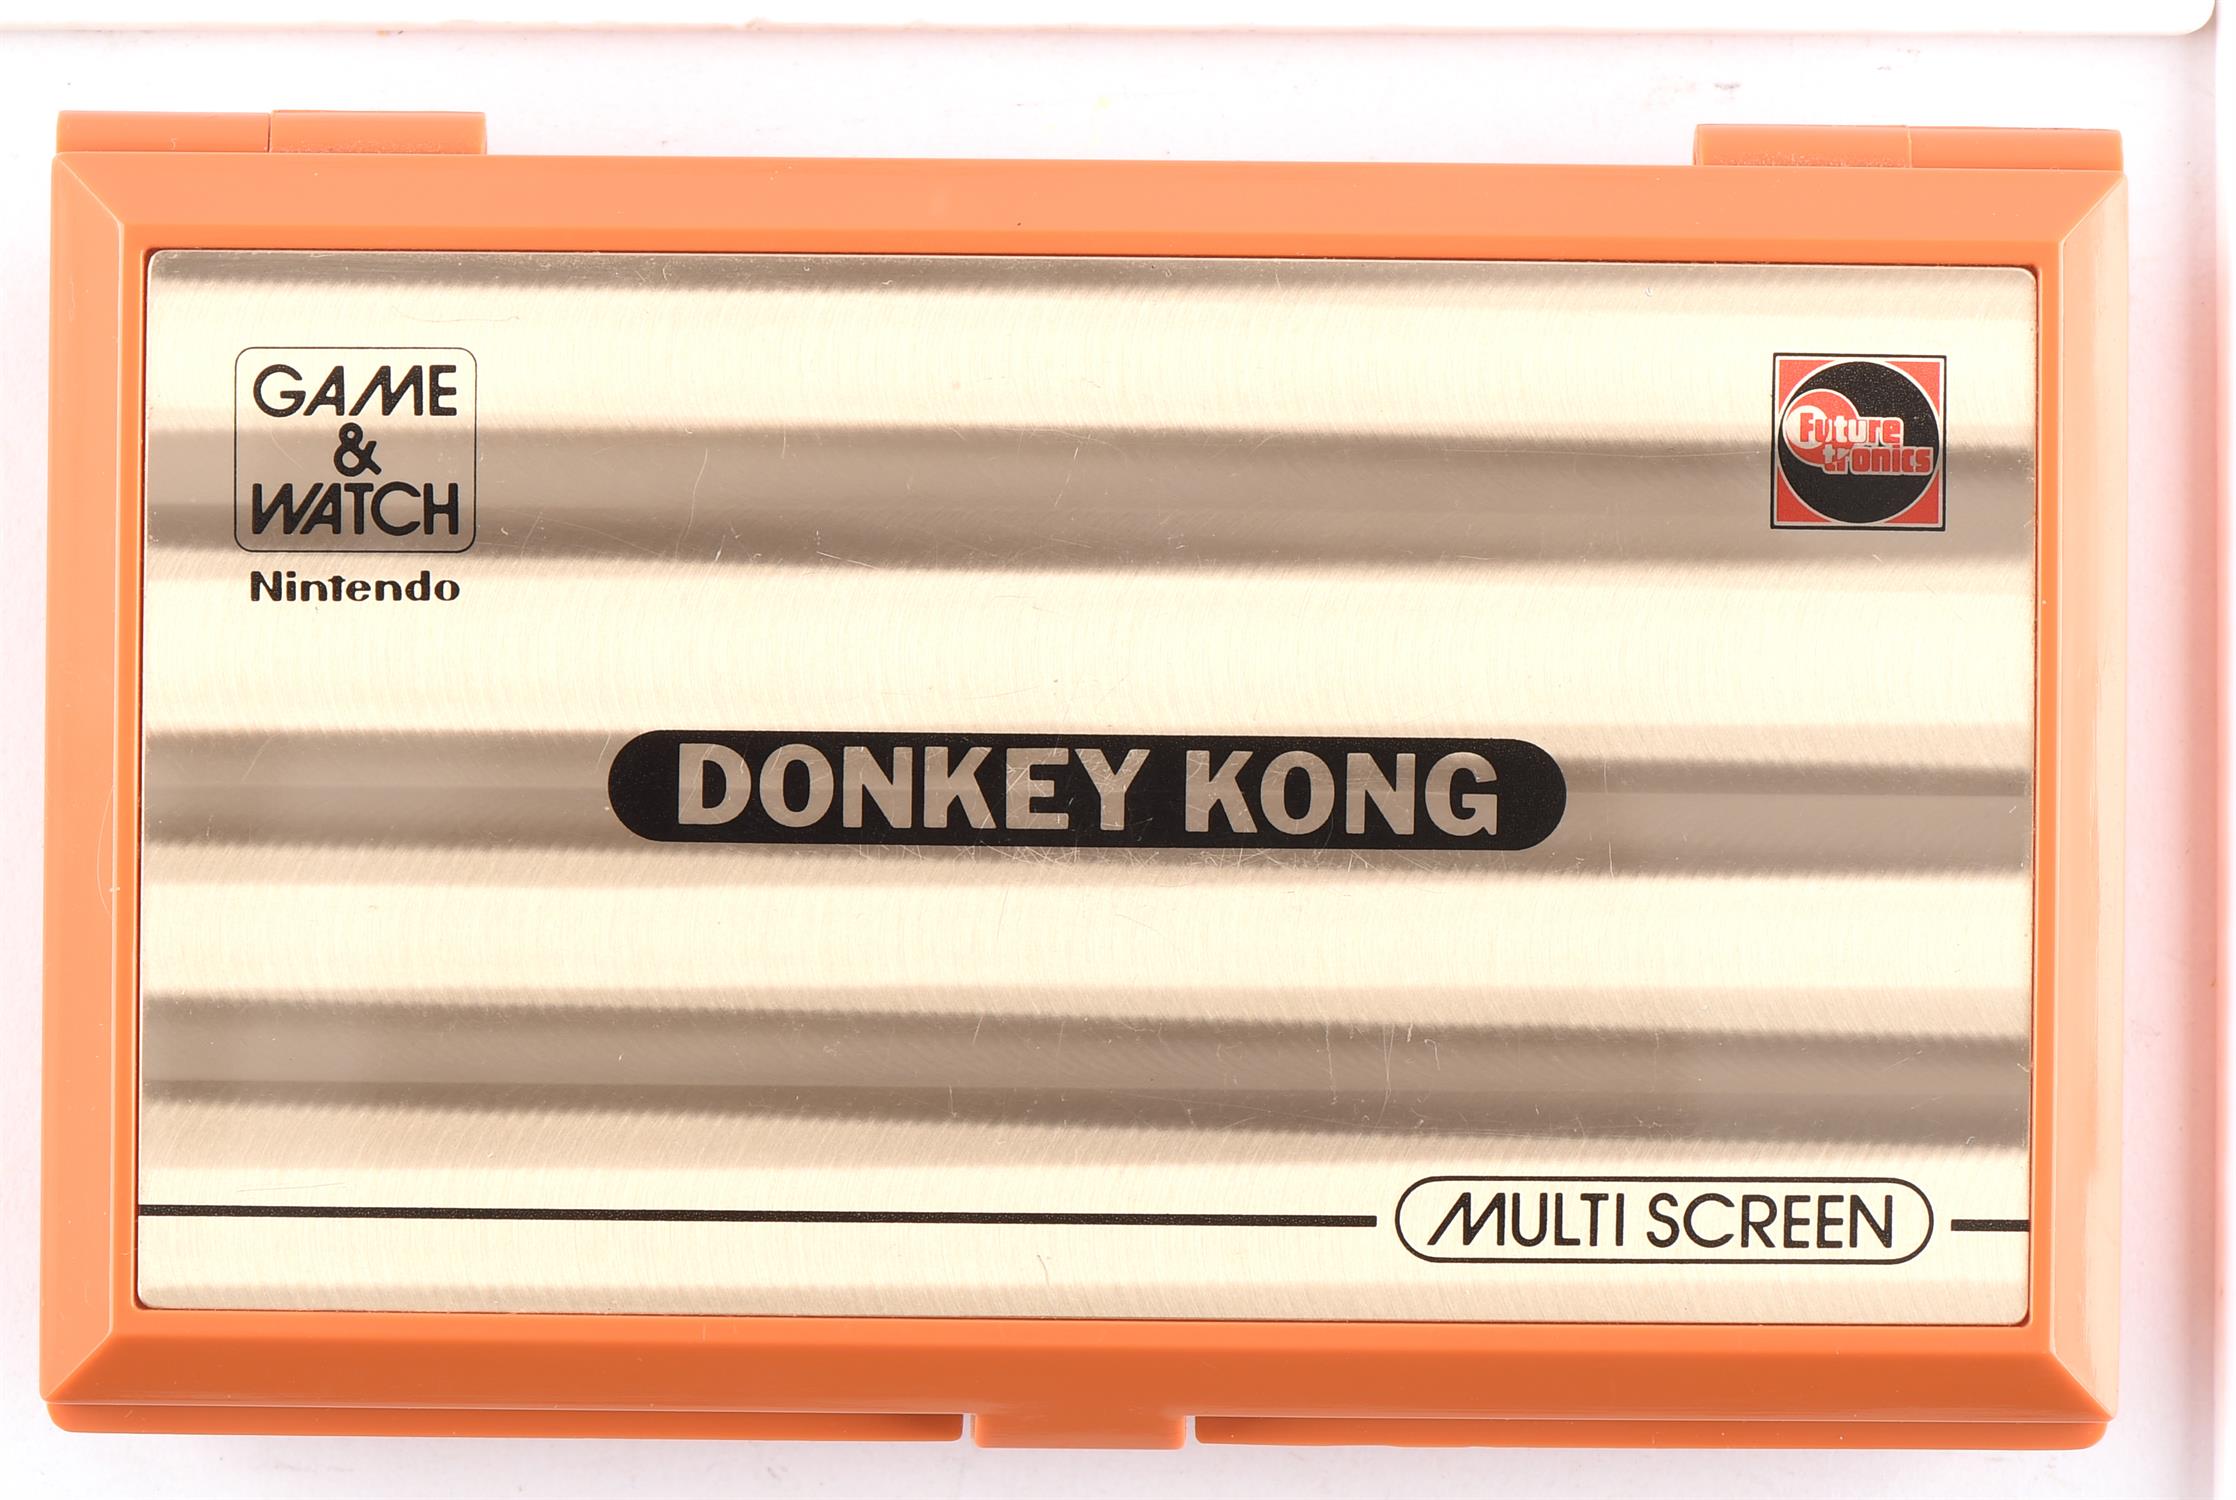 Nintendo Game & Watch Donkey Kong [DK-52] handheld console from 1982 (complete, boxed and in a - Image 10 of 13